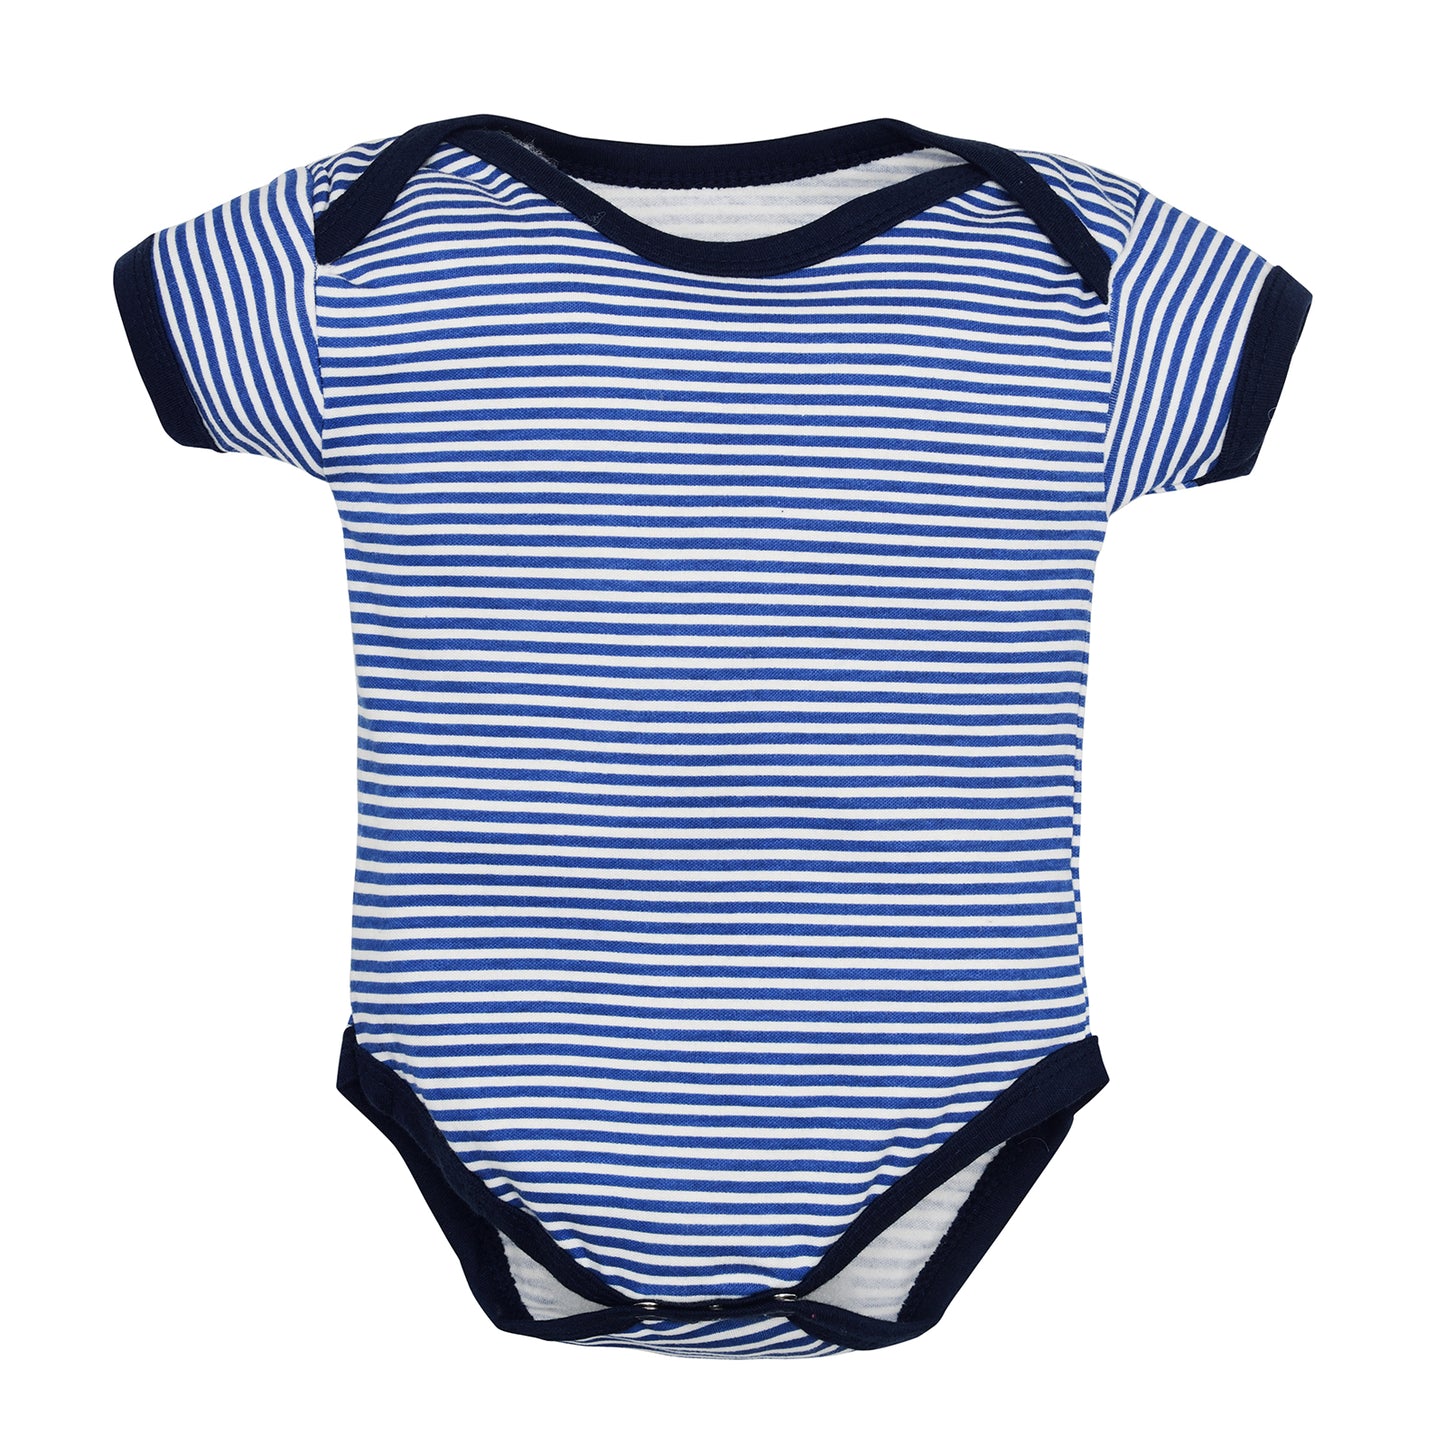 Bodice Half Sleeves Baby Romper Body Suits Jump Suit for Boys and Girls Set of 3 (Navy Blue)